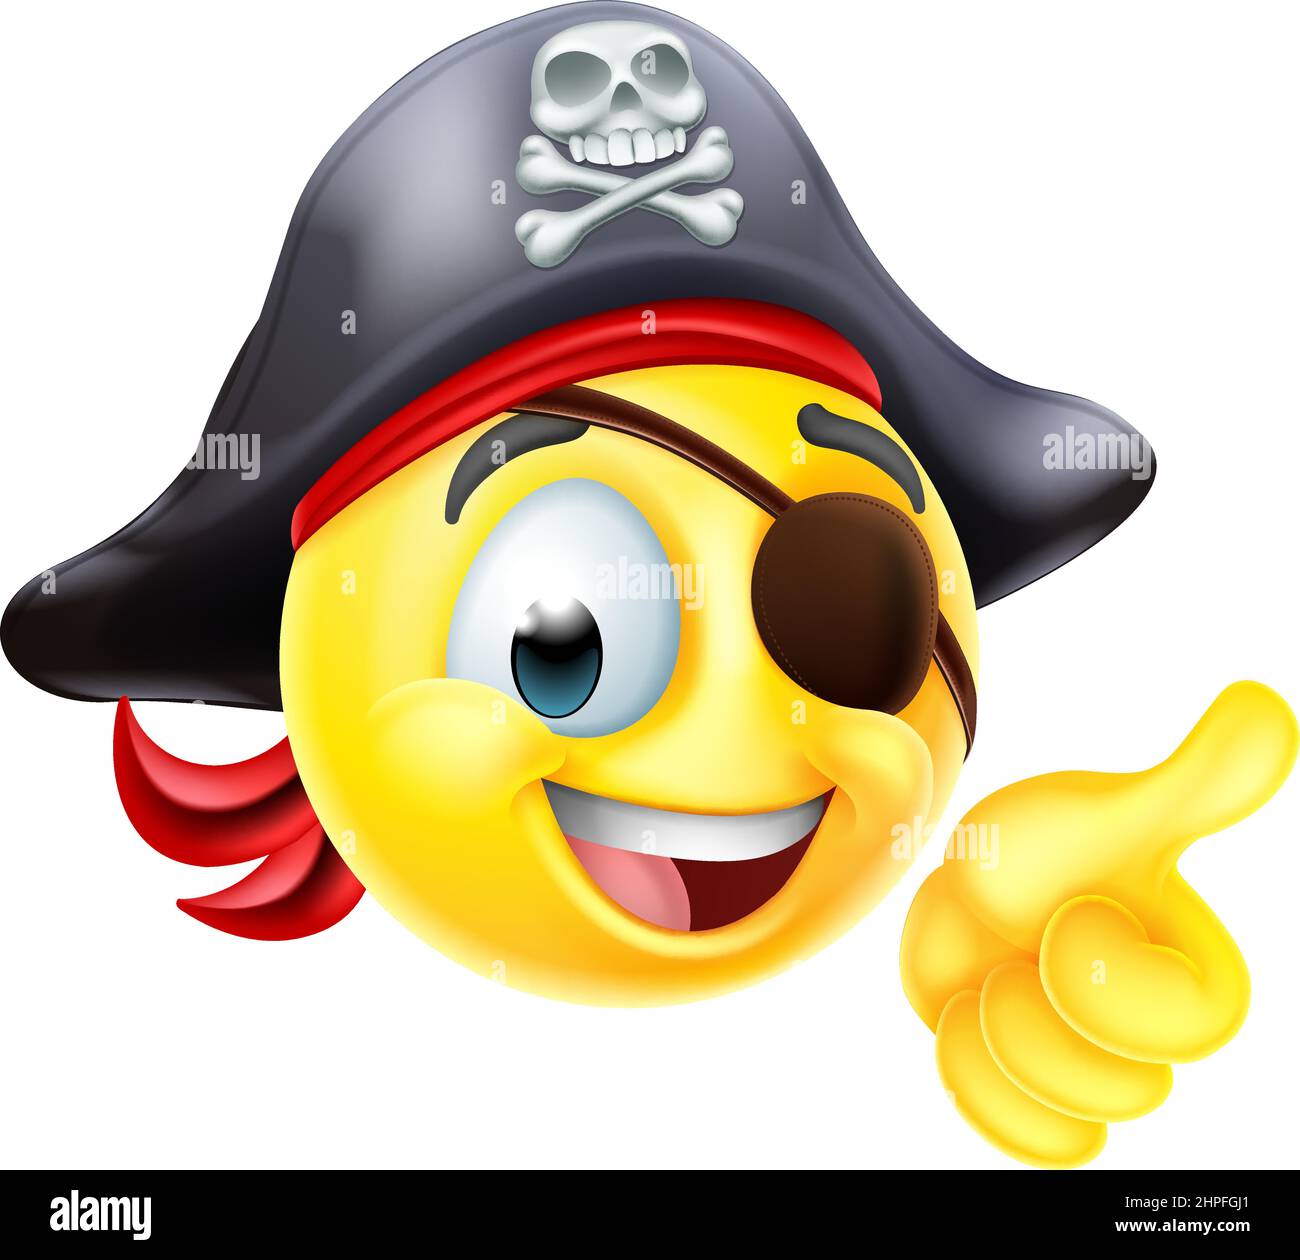 Pirate Thumbs Up Emoticon Cartoon Face Stock Vector